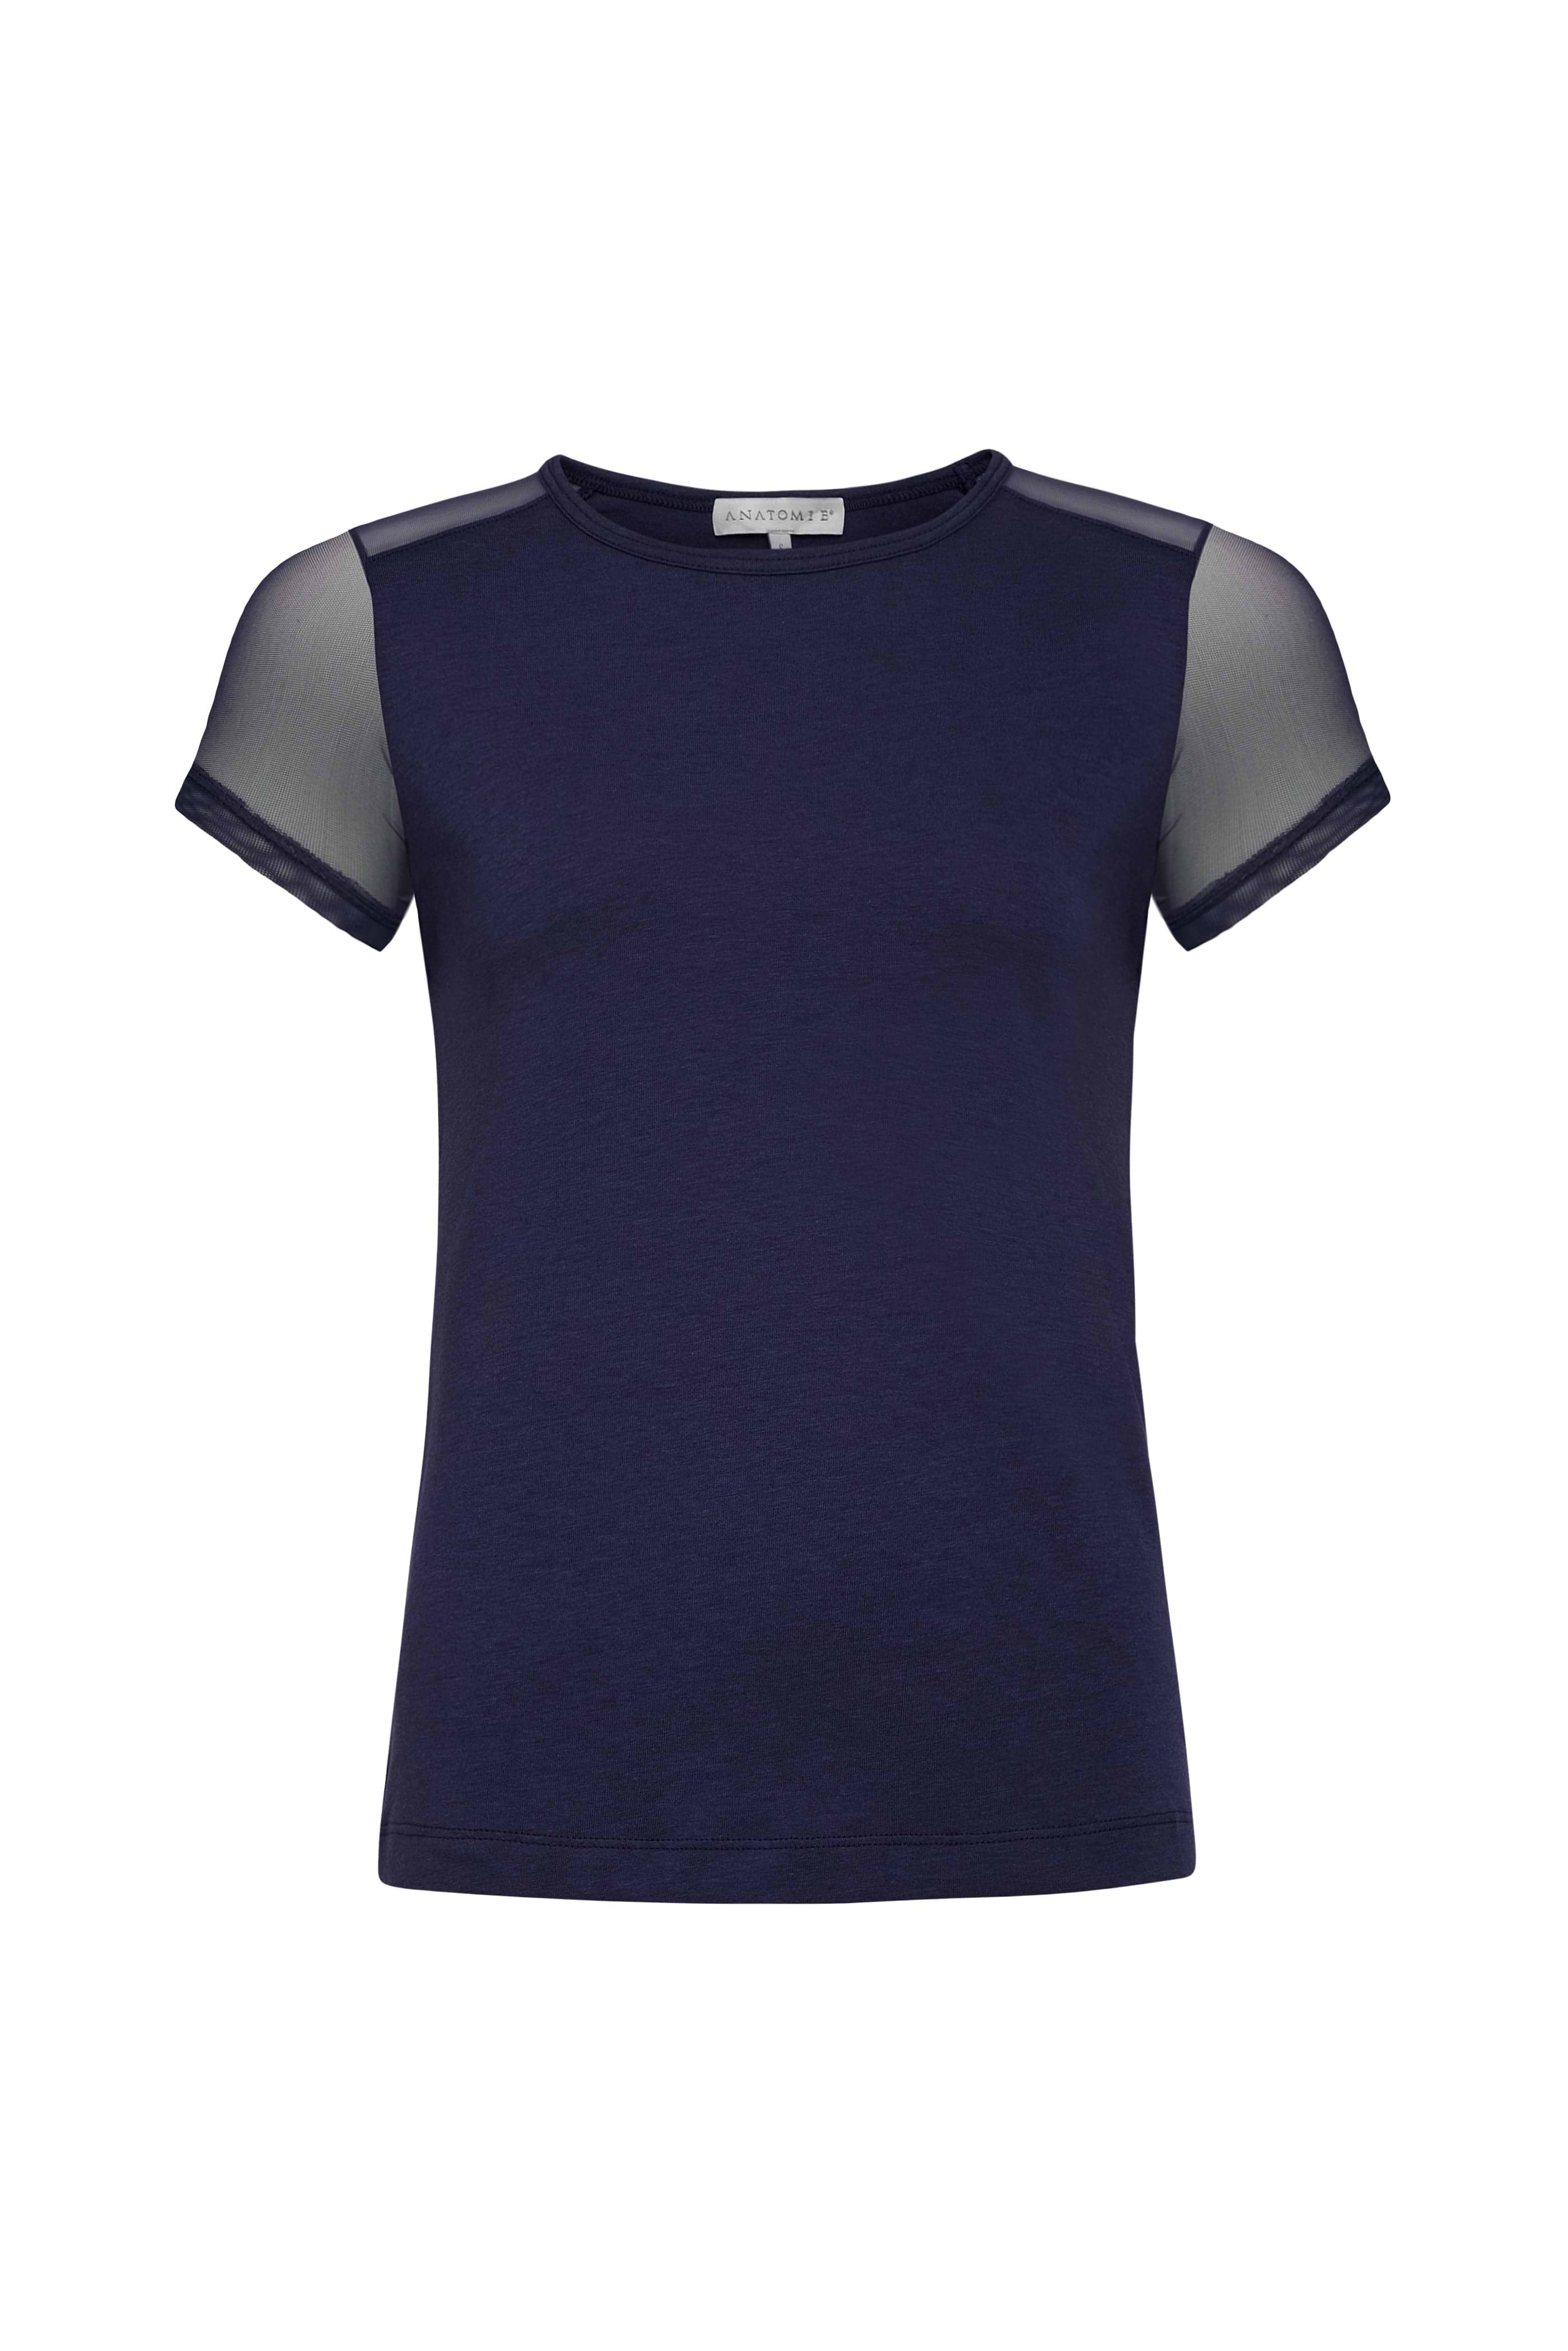 The Best Travel Shirt. Flat Lay of a Melissa Pima Cotton T-Shirt in Navy